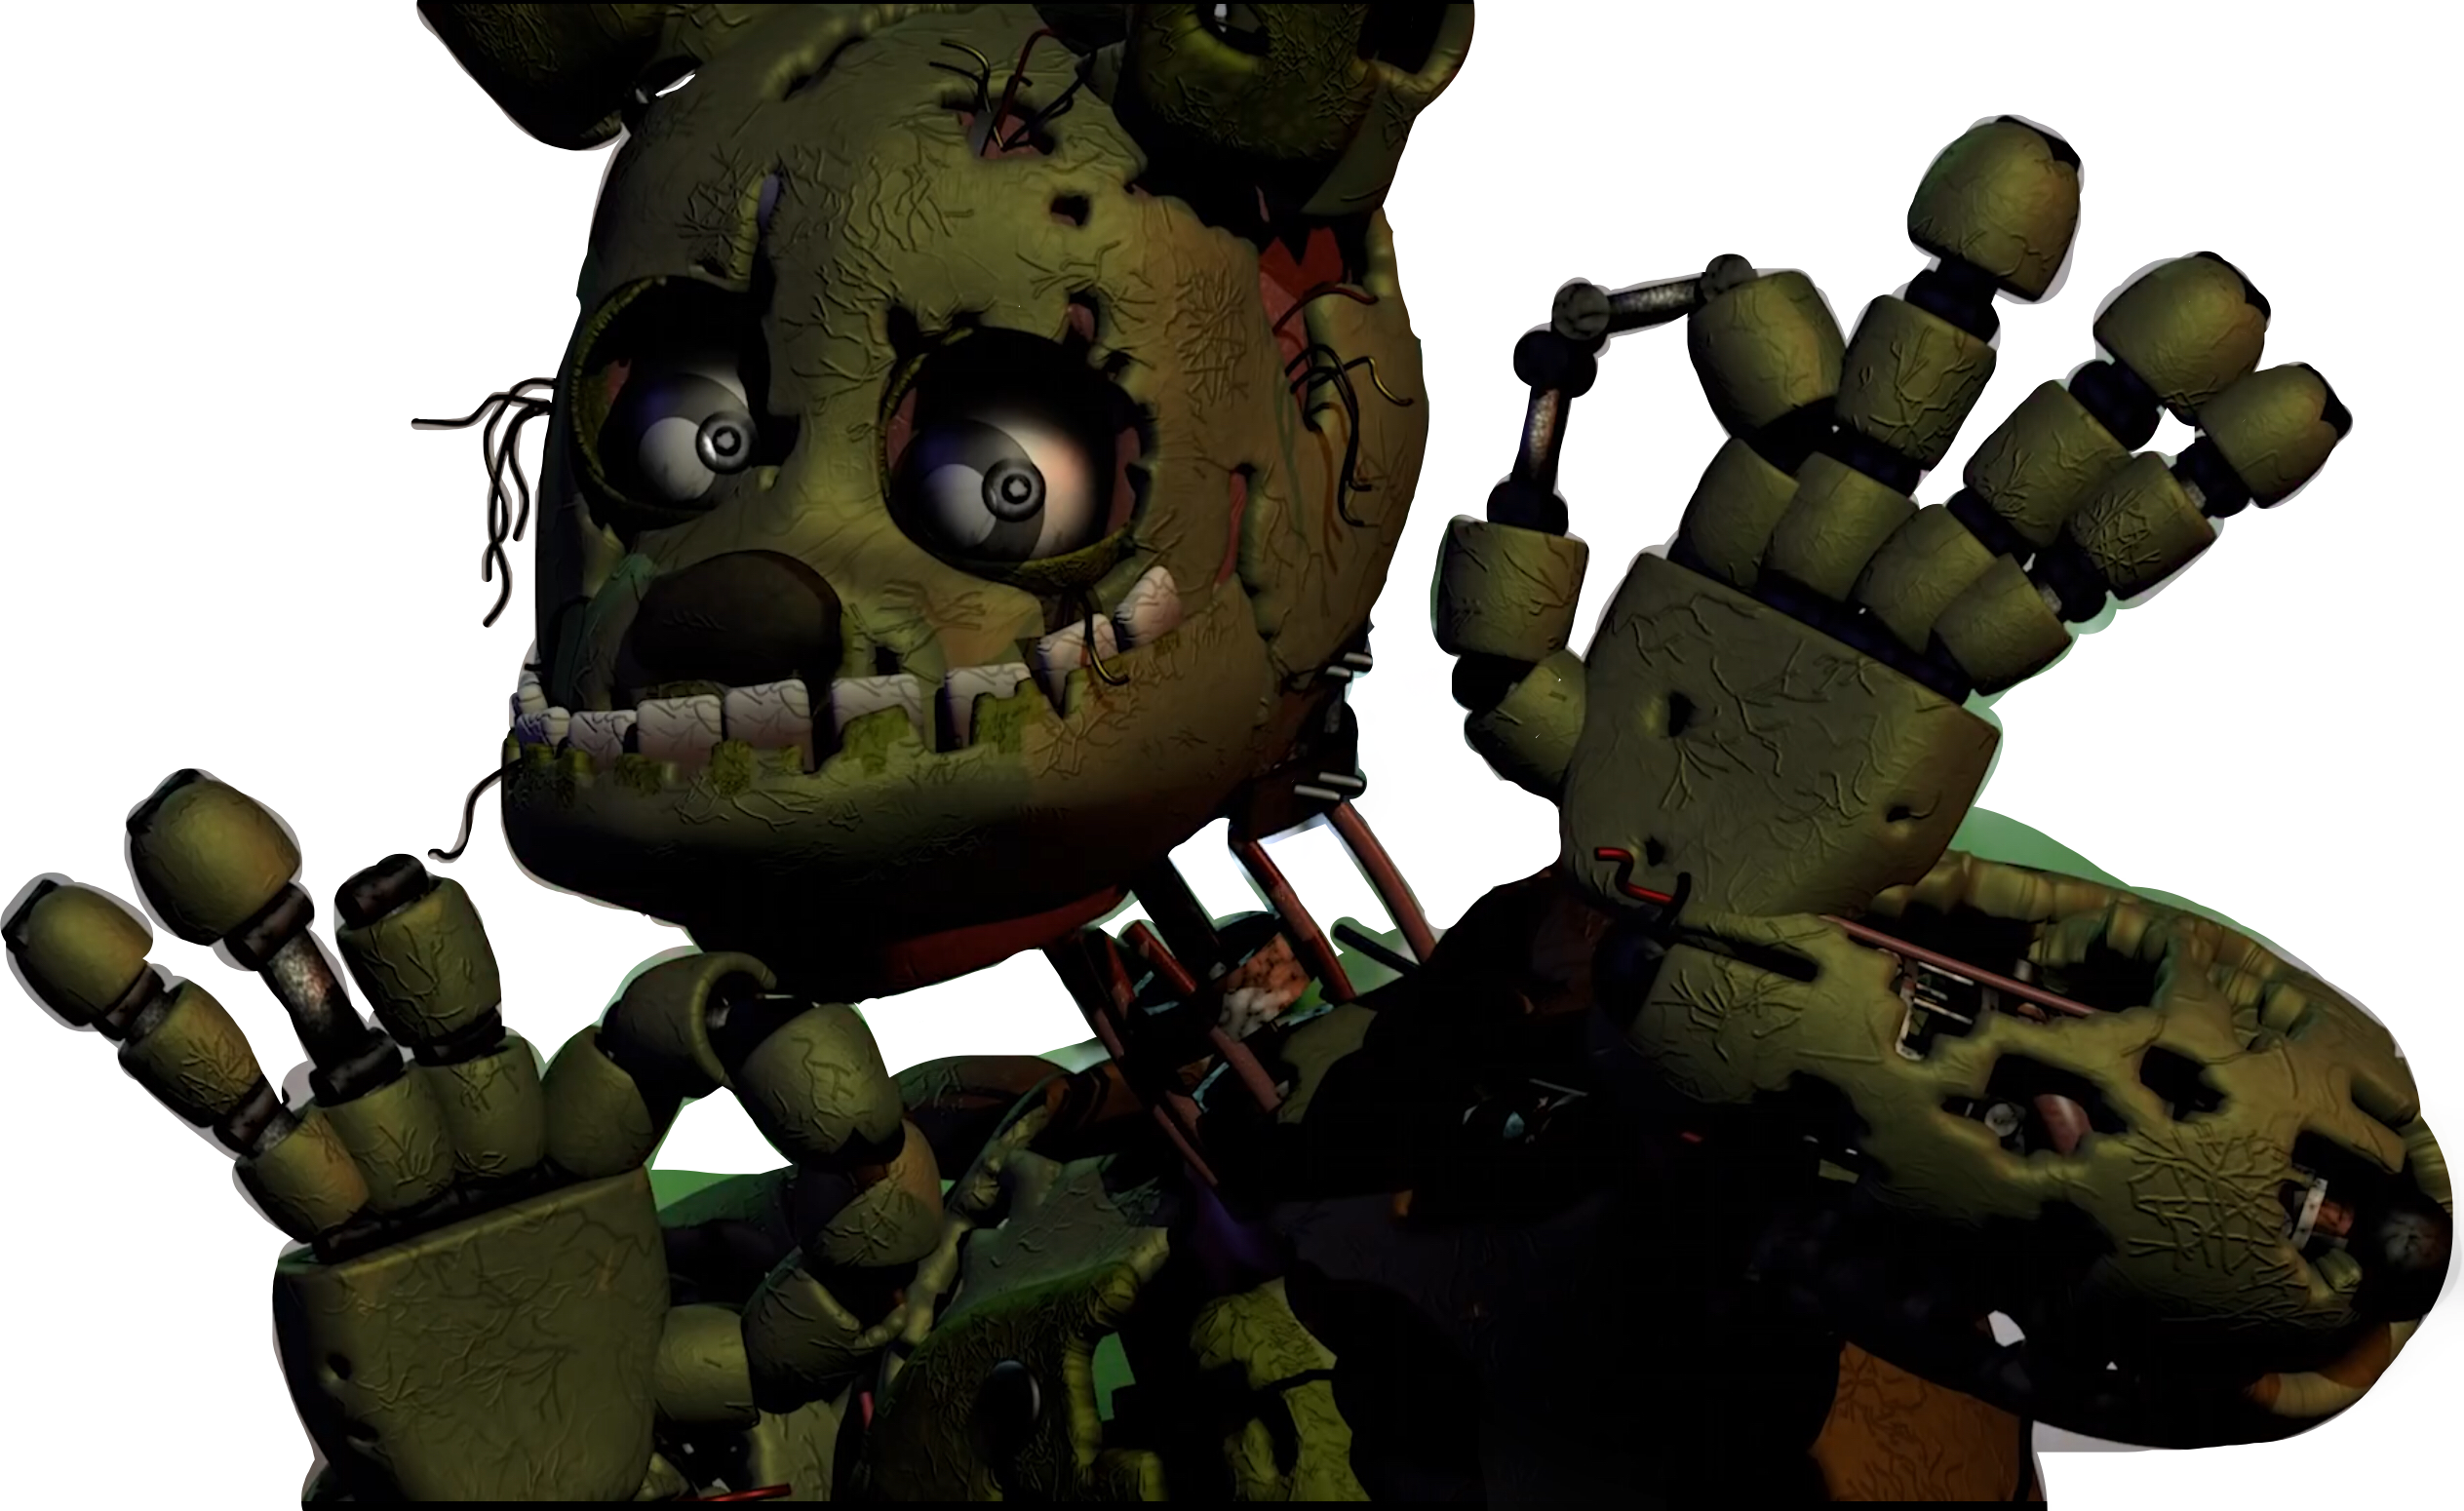 This visual is about fivenightsatfreddys springtrap fnaf3 fnaf freetoedit #...